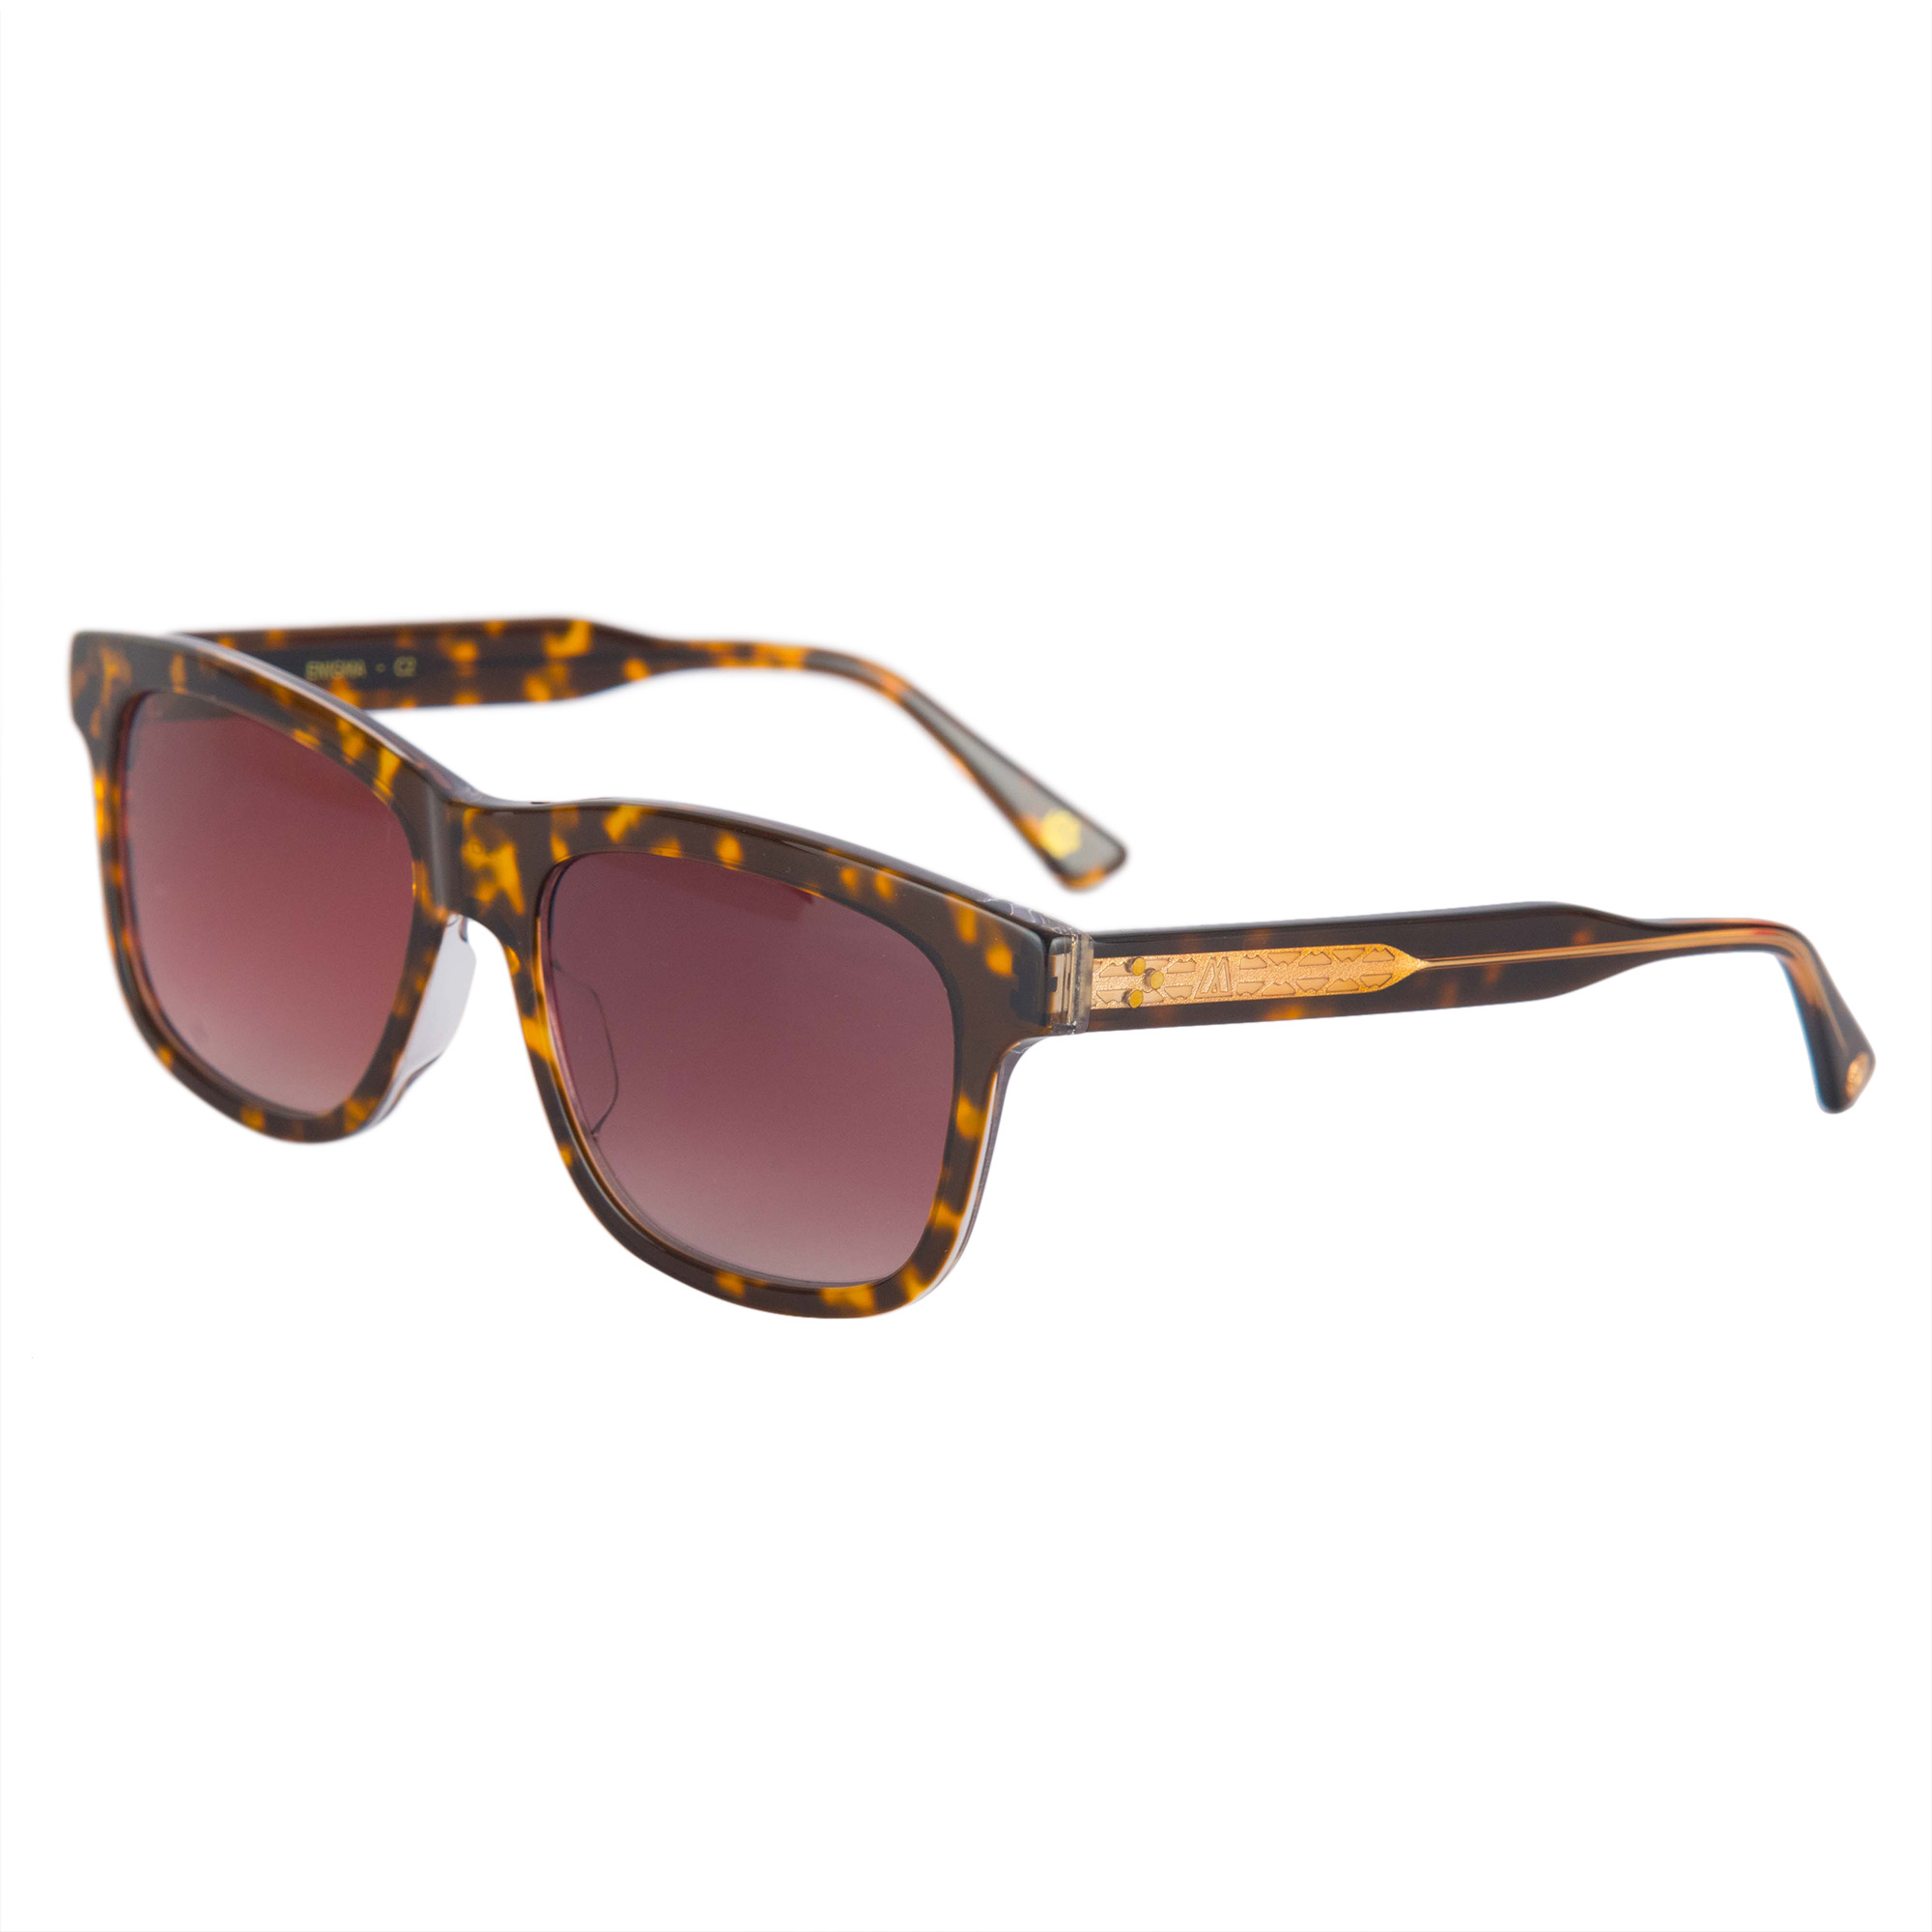 Step into the Sun with The Monk's Stunning New Sunglasses Collection